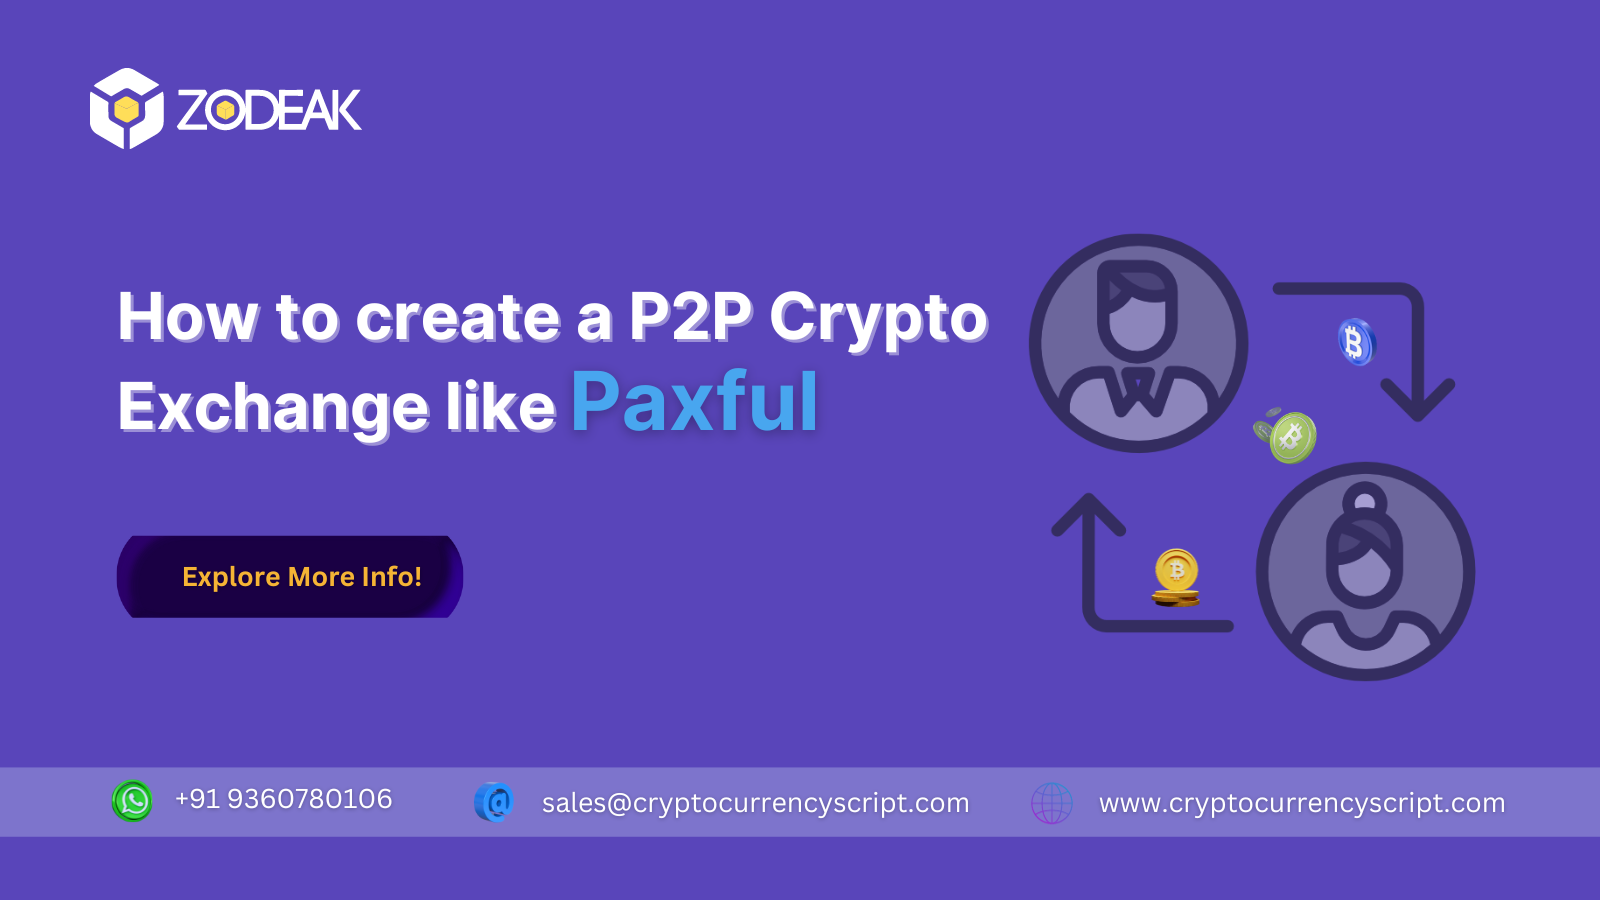 How to create a P2P Crypto Exchange like Paxful